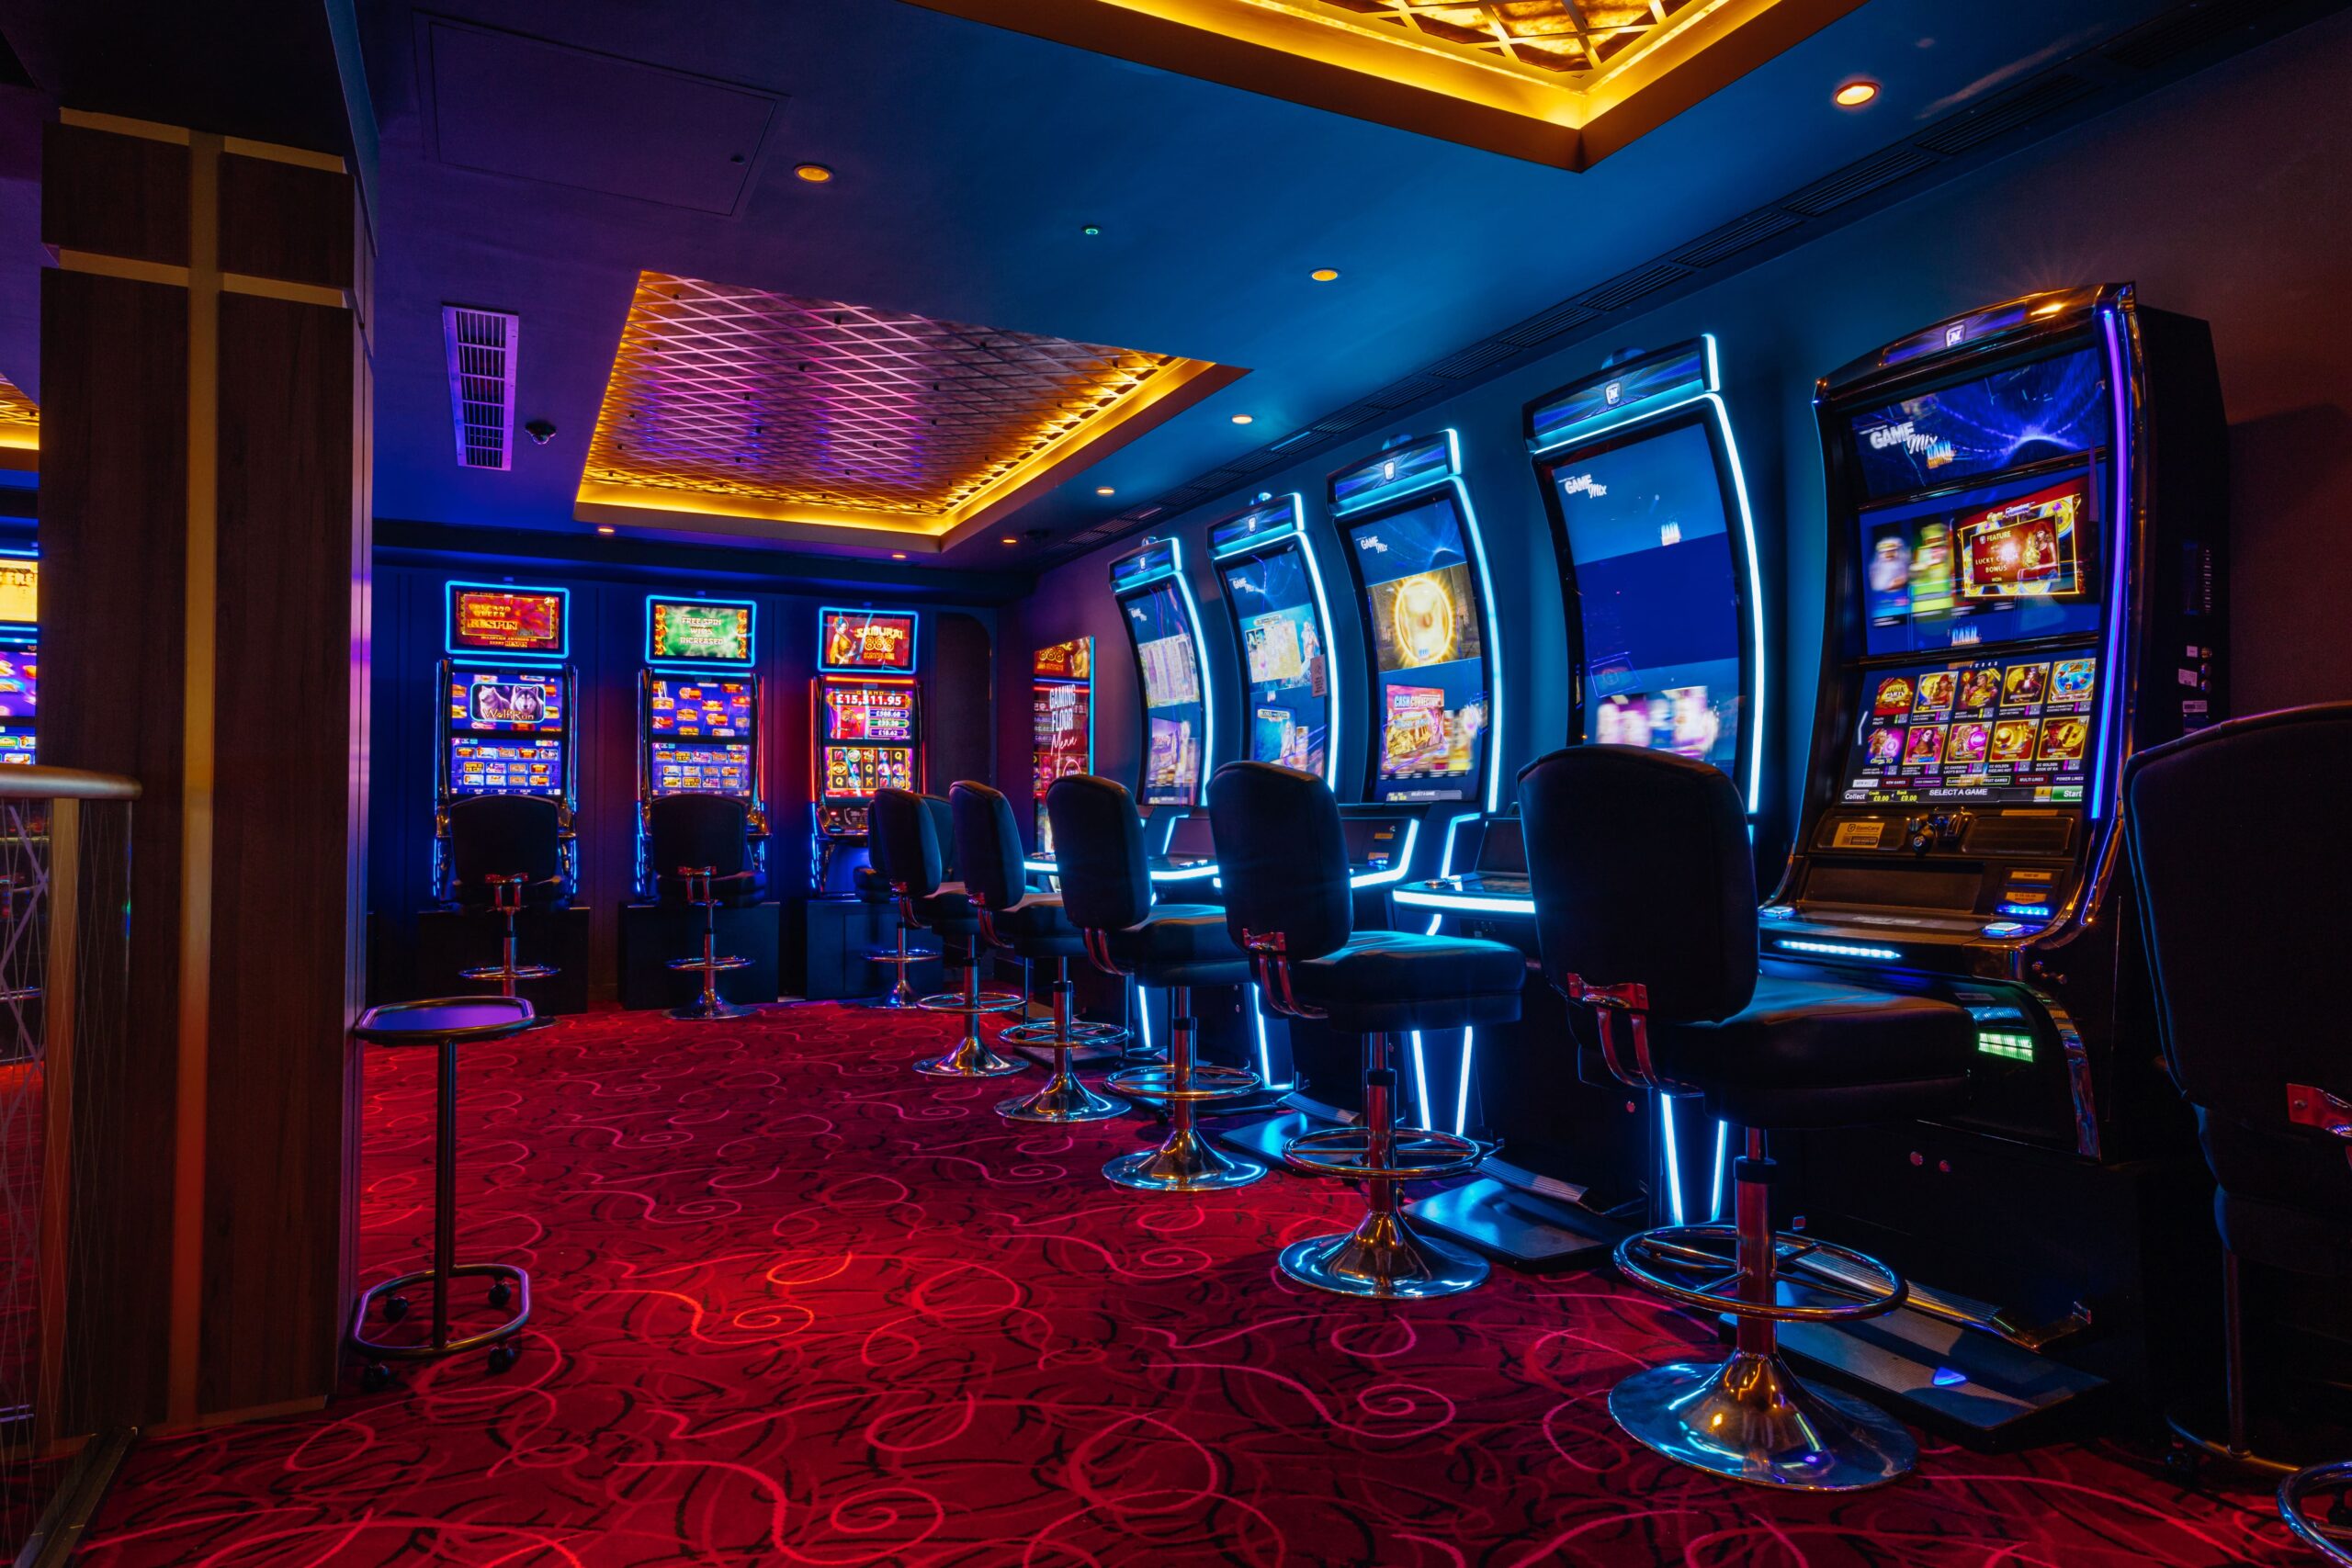 Napoleons’ Guide on How to Play Slots - How to Play Slots - Napoleons Casinos & Restaurants